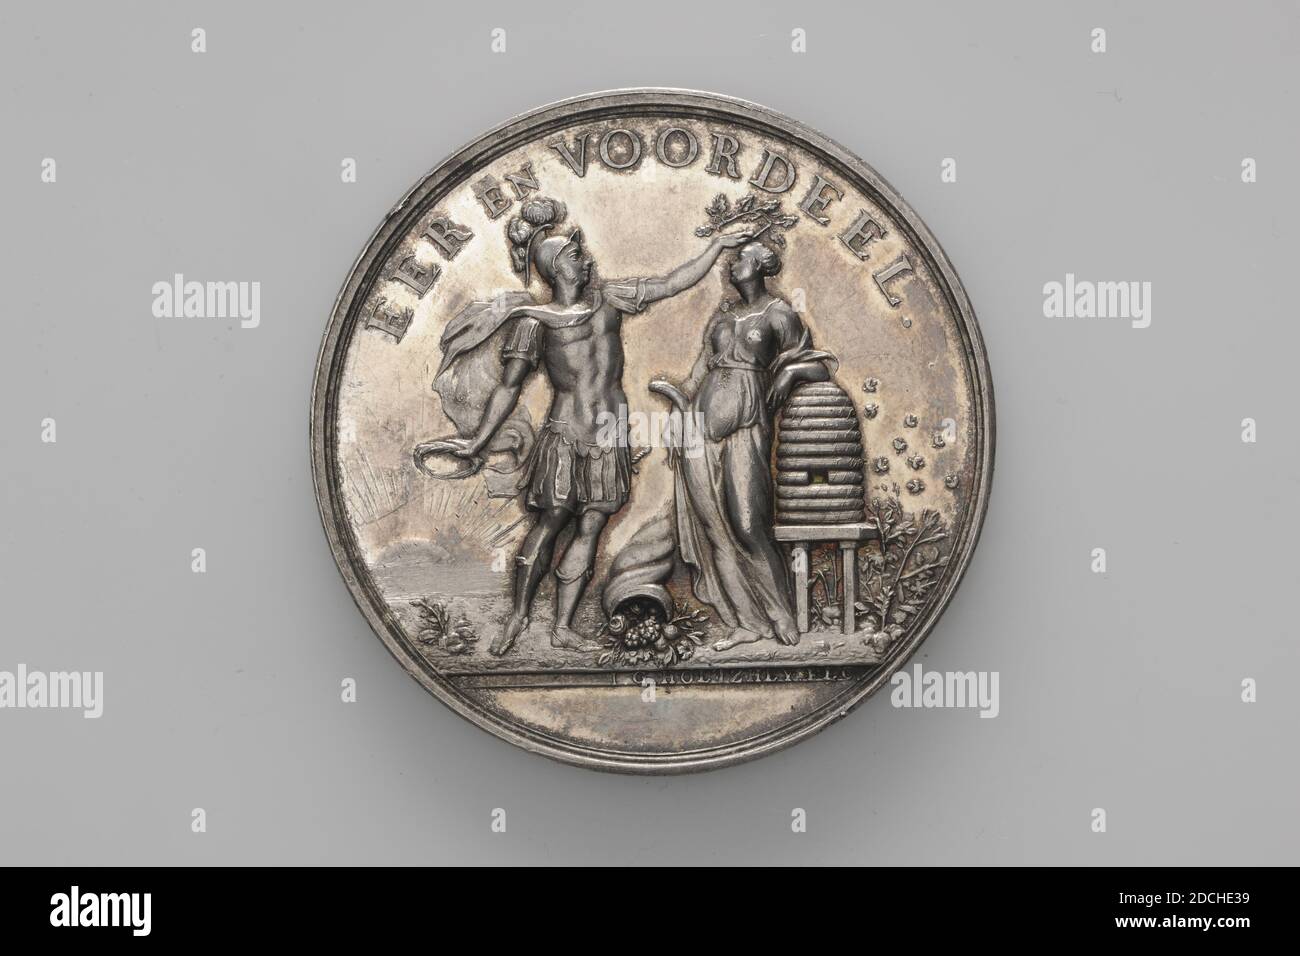 prize medal, 1848, minted, General: 5.9 x 0.4cm (59 x 4mm), Weight: 51.3g, personification, female, sunrise Stock Photo